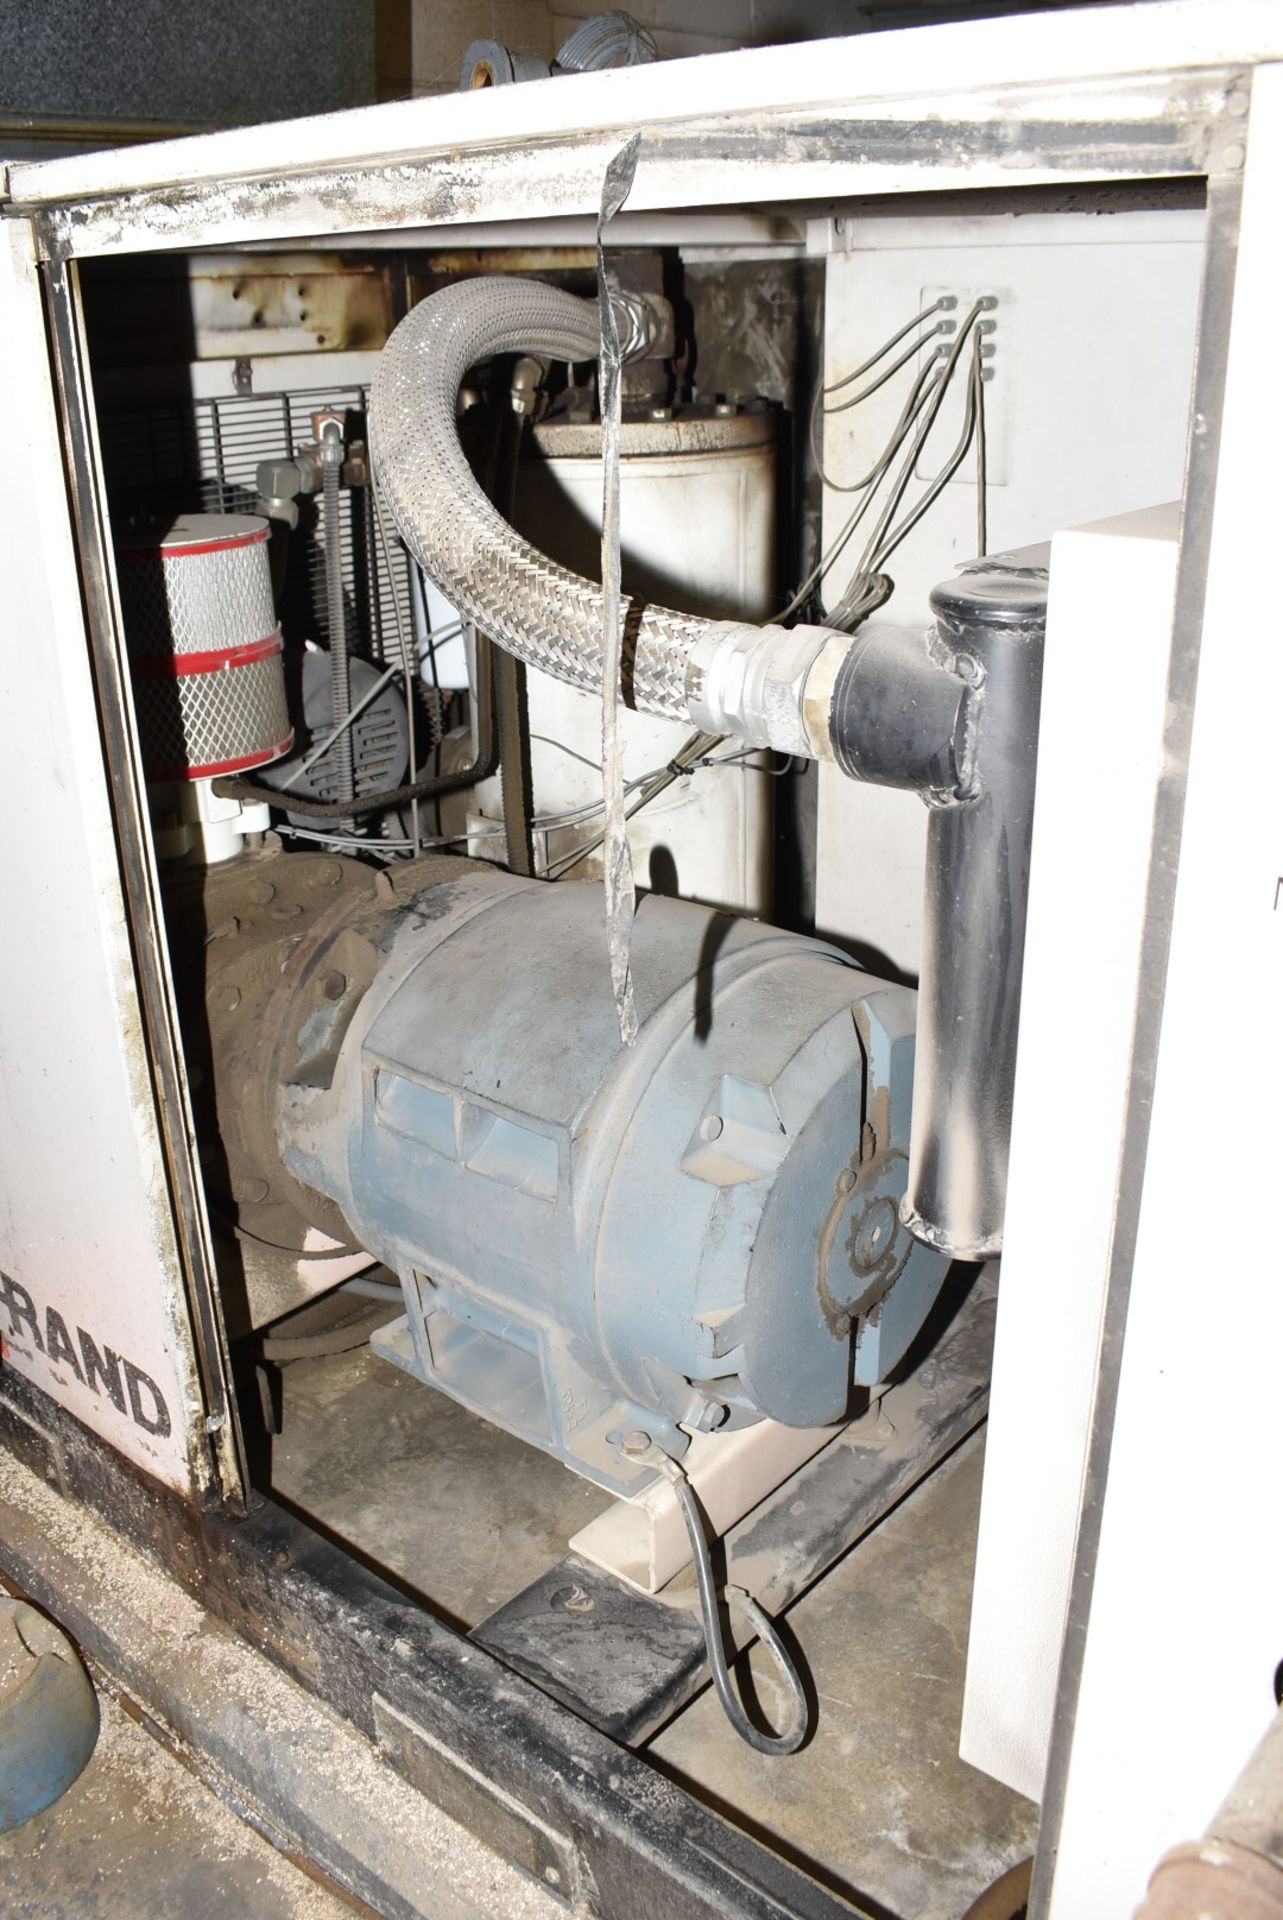 INGERSOLL RAND SSR-EP100 100 HP ROTARY SCREW TYPE AIR COMPRESSOR WITH 446 CFM @ 125 PSI CAPACITY, - Image 5 of 6